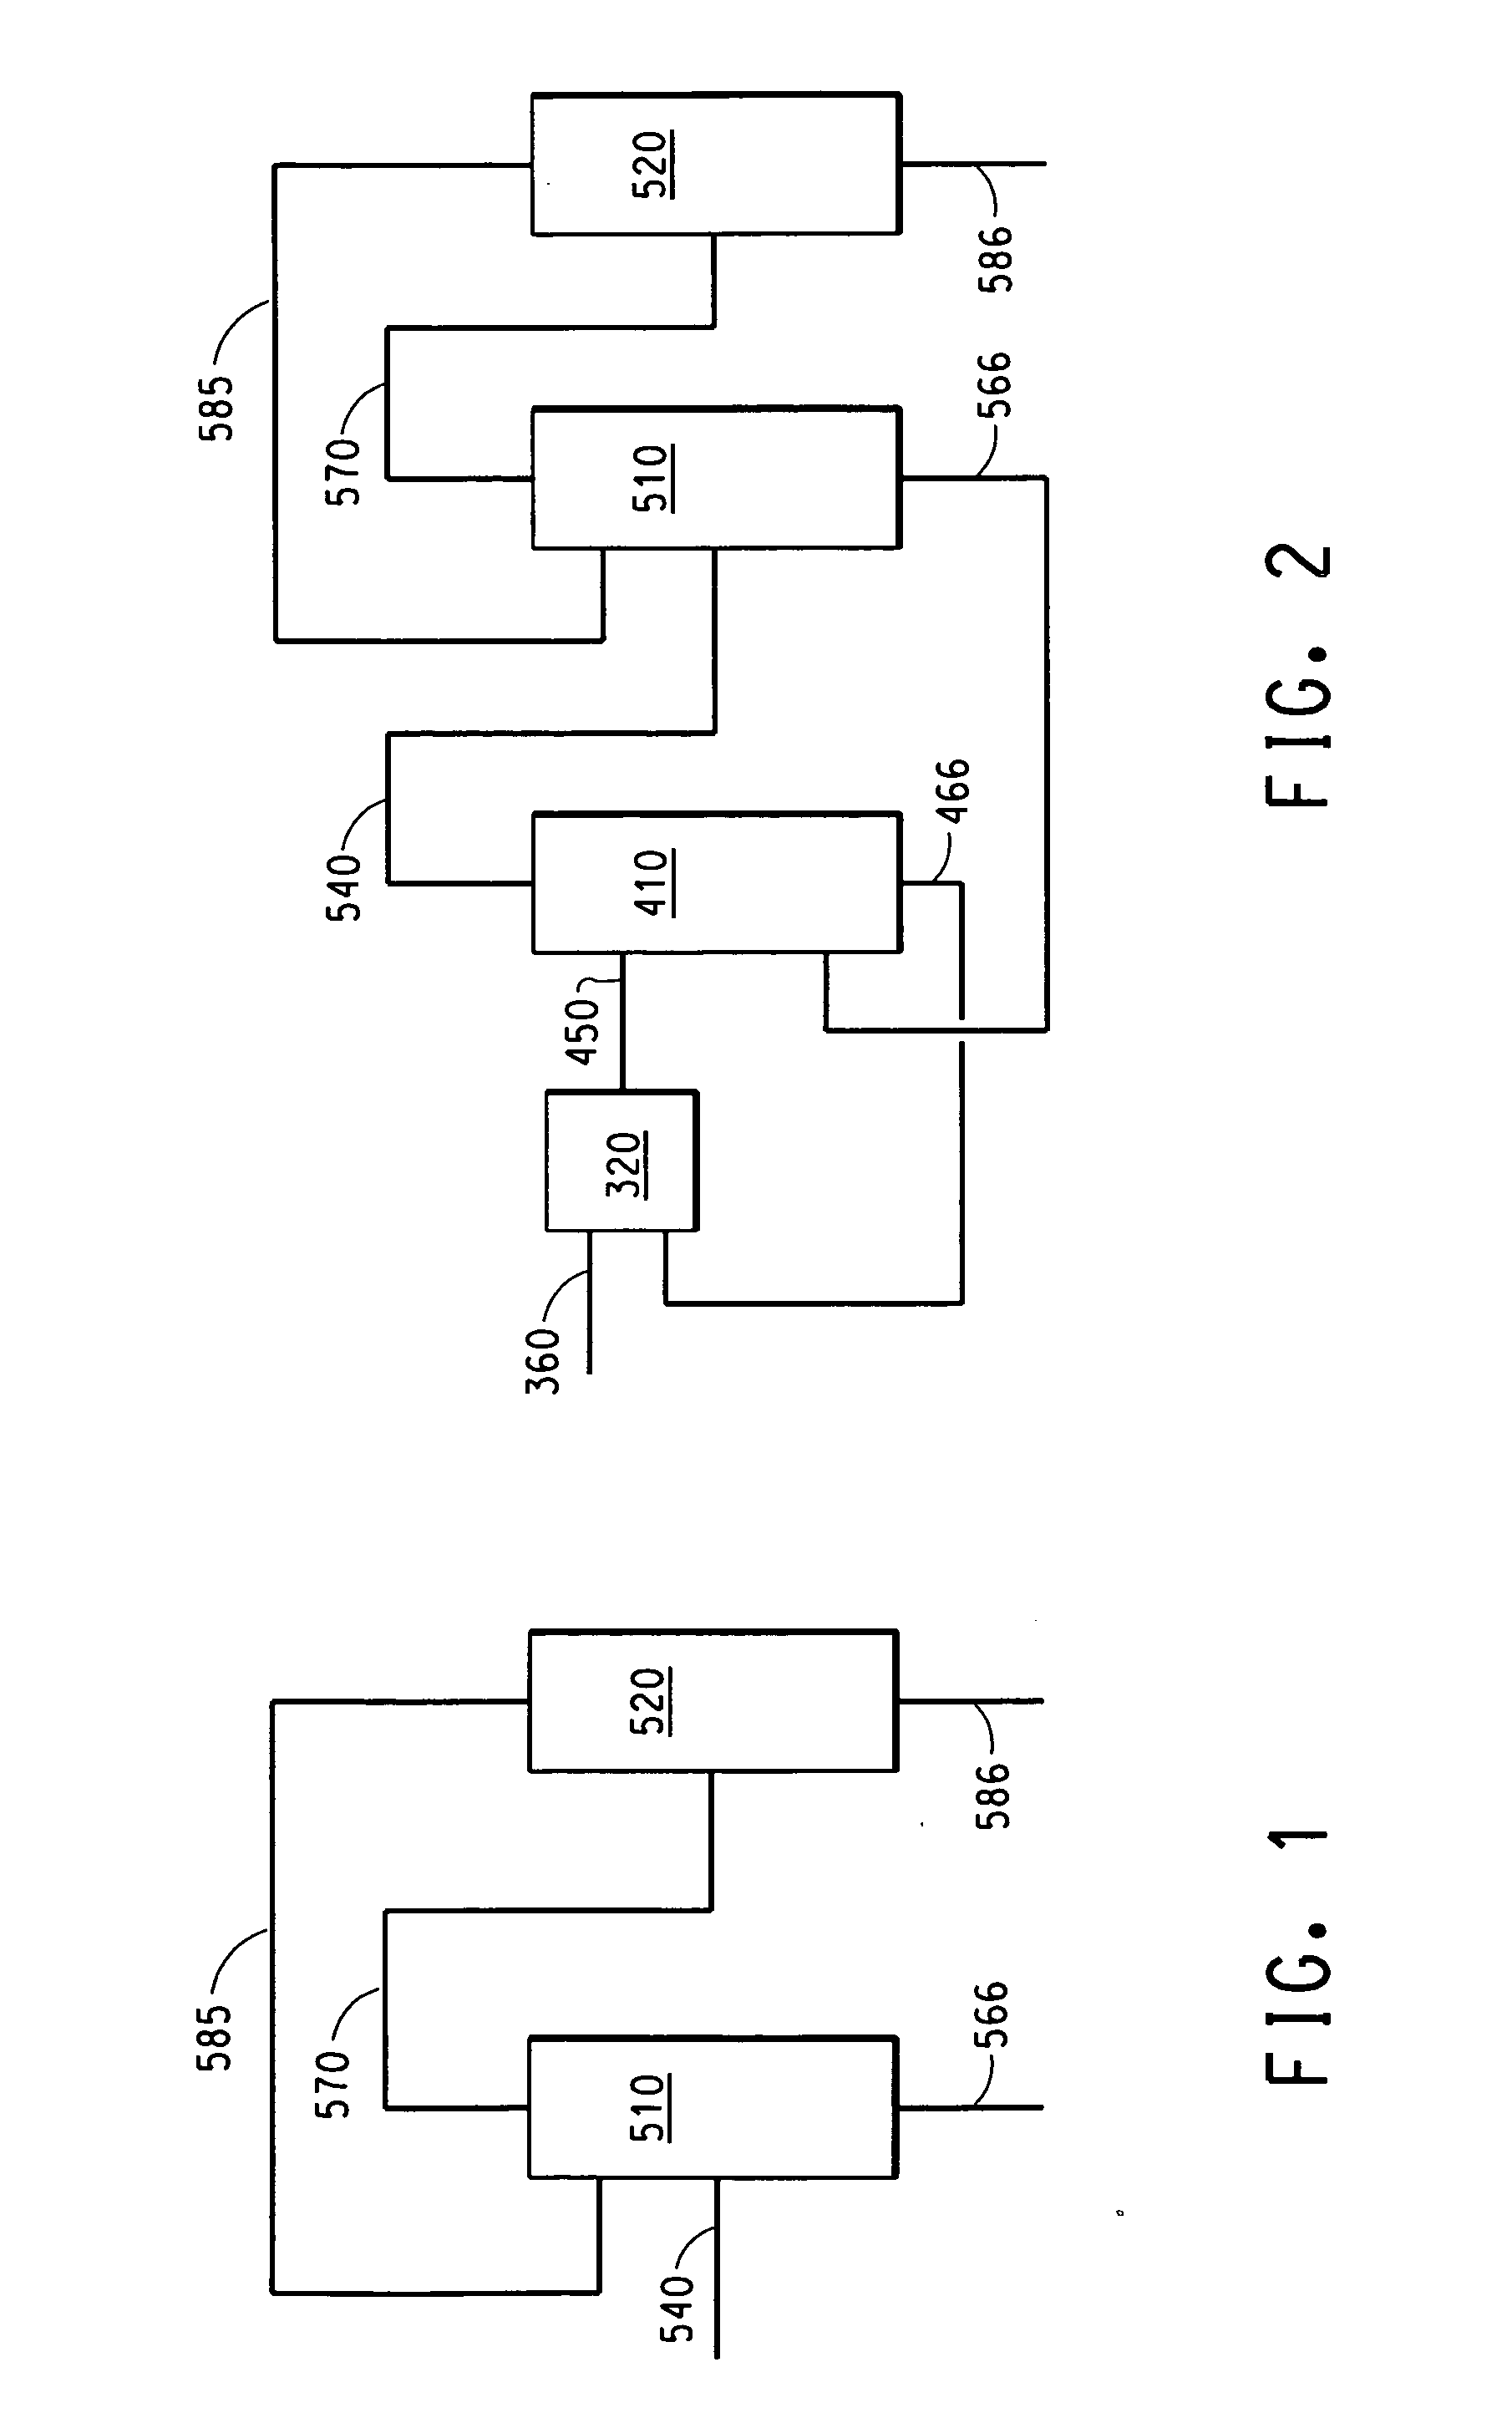 Processes for production and purification of hydrofluoroolefins